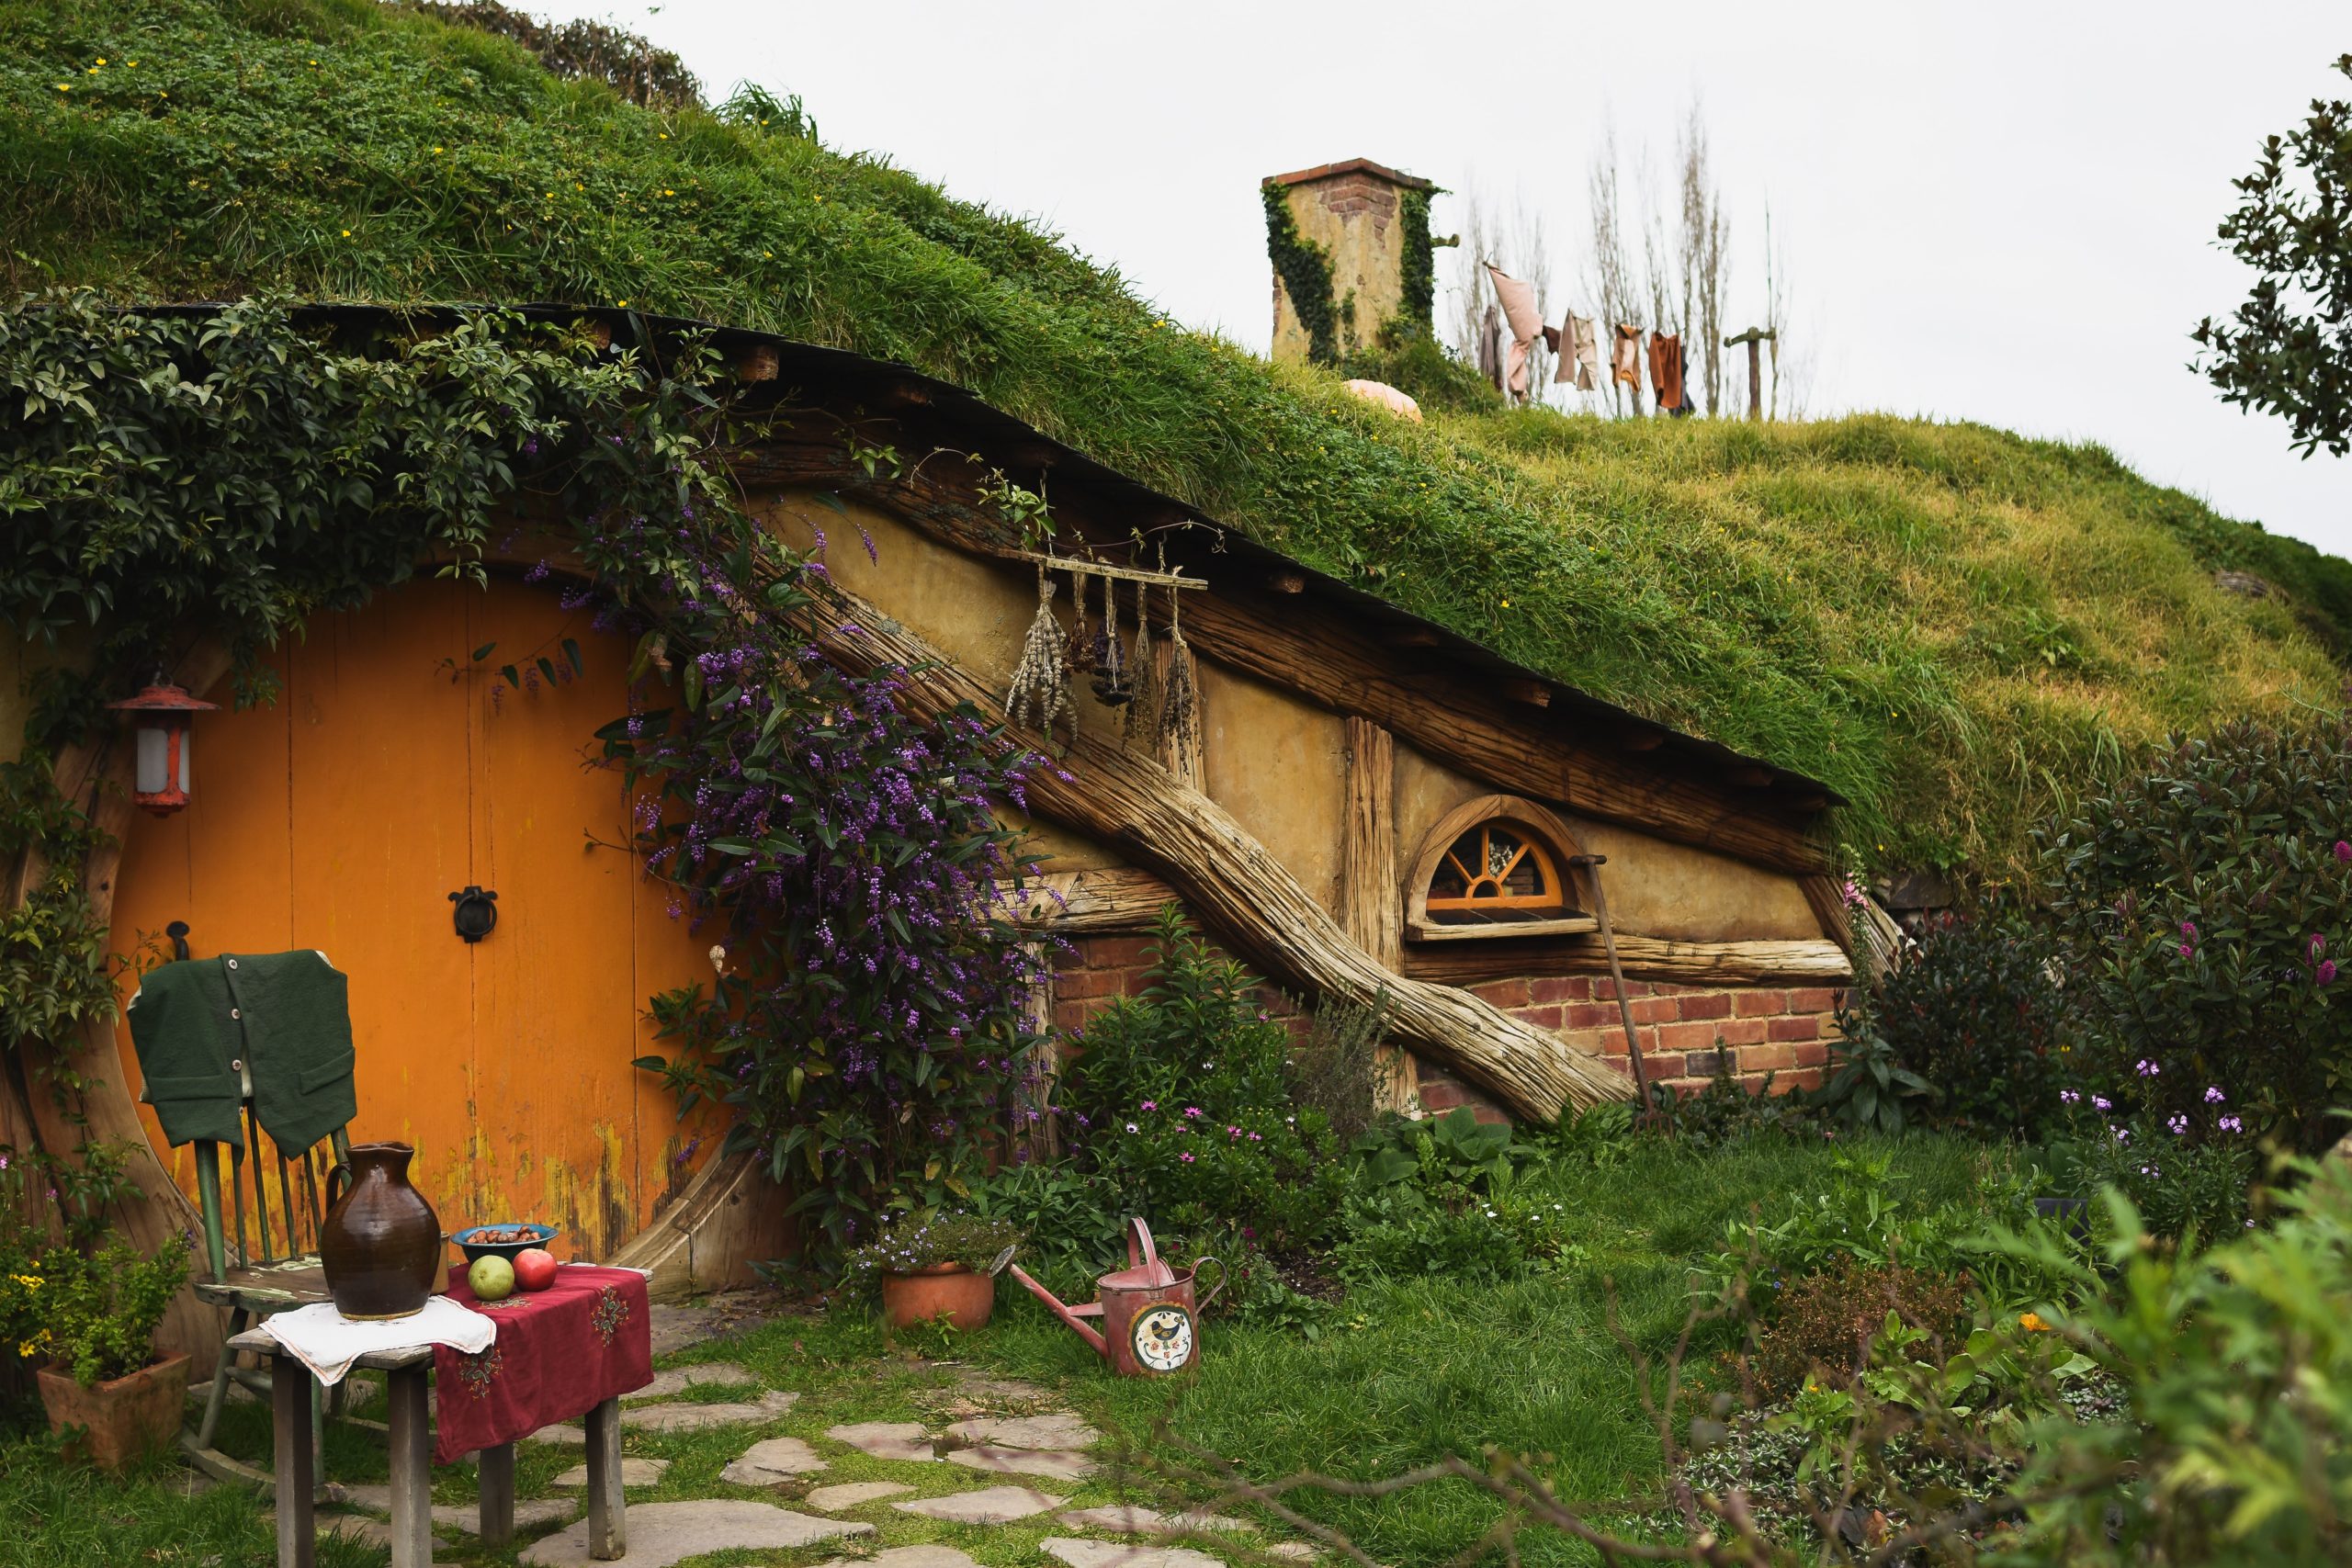 The set of the Shire from Lord of the Rings